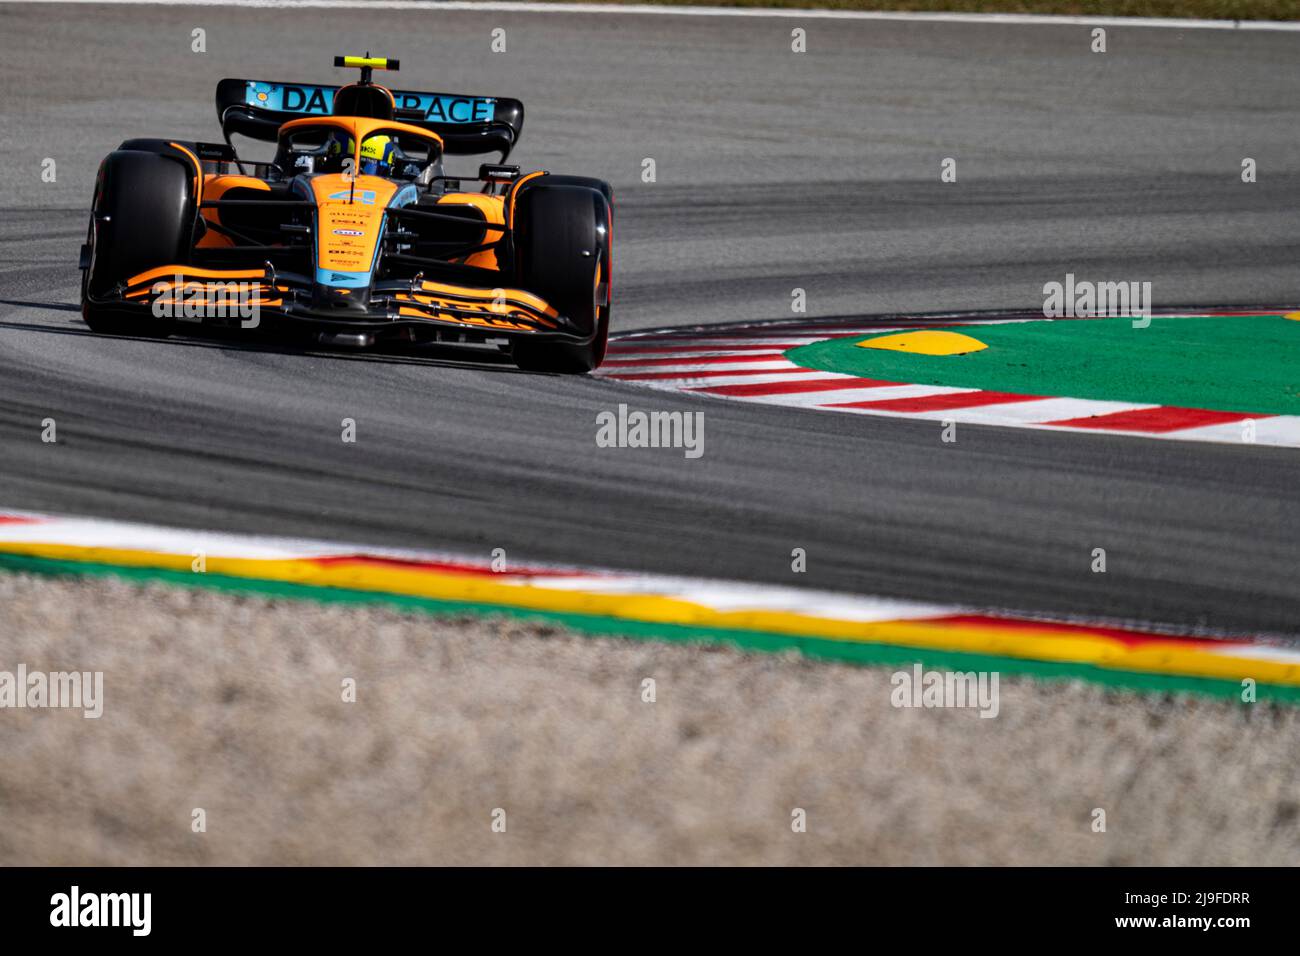 Barcelona, Spain. 21st May, 2022. Lando Norris of Great Britain drives his McLaren MCL36 during qualifying ahead of the F1 Grand Prix of Spain at Circuit de Barcelona-Catalunya on May 21, 2022 in Barcelona, Spain. Foto: Siu Wu. Credit: dpa/Alamy Live News Stock Photo